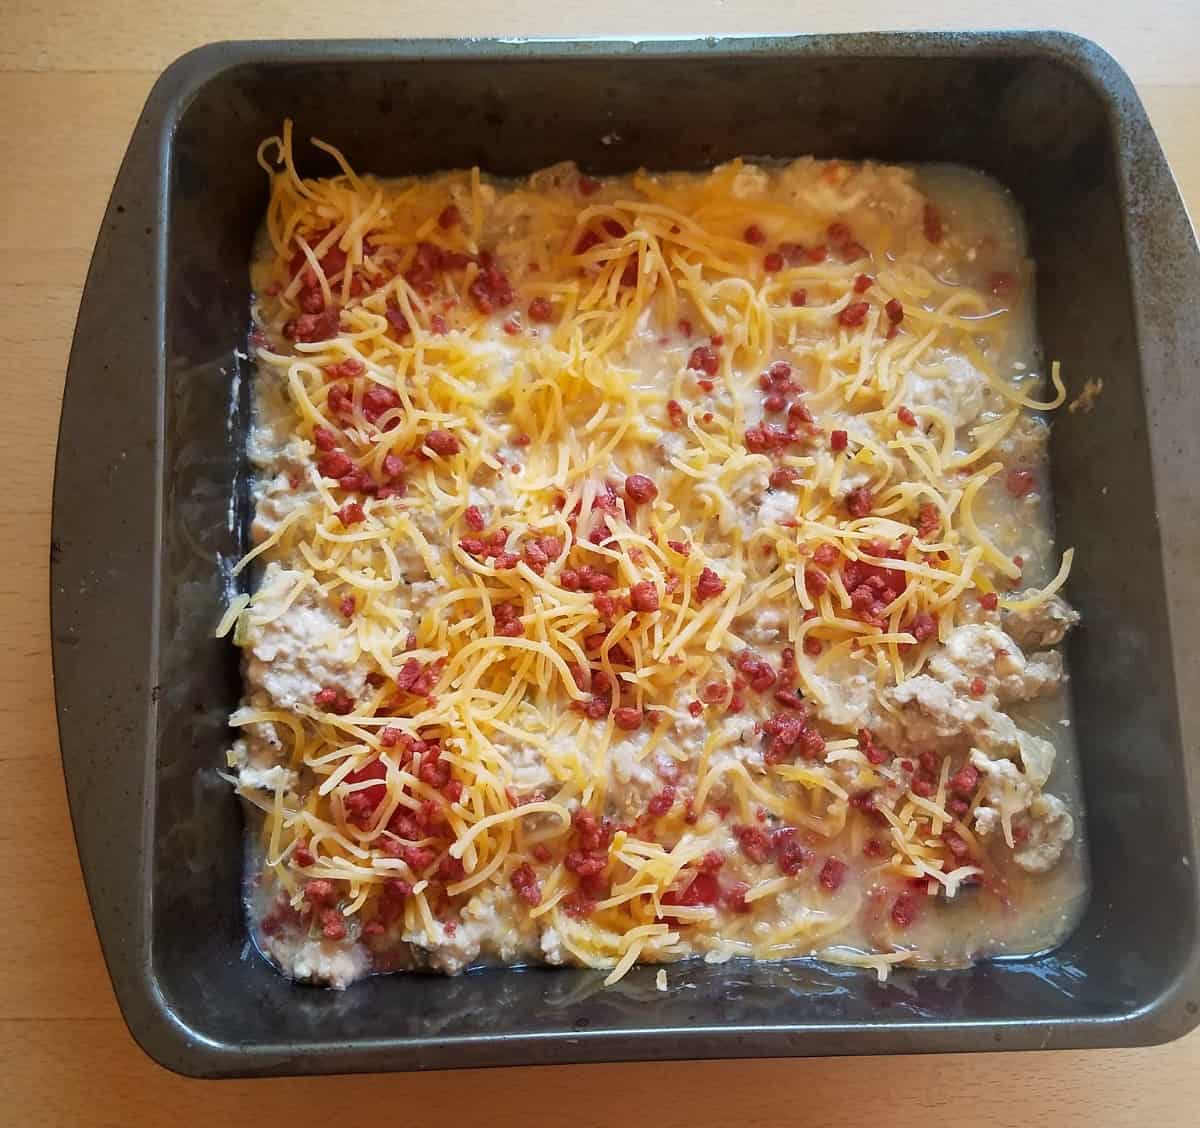 Unbaked cheeseburger casserole topped with shredded cheese and bacon bits in baking dish.